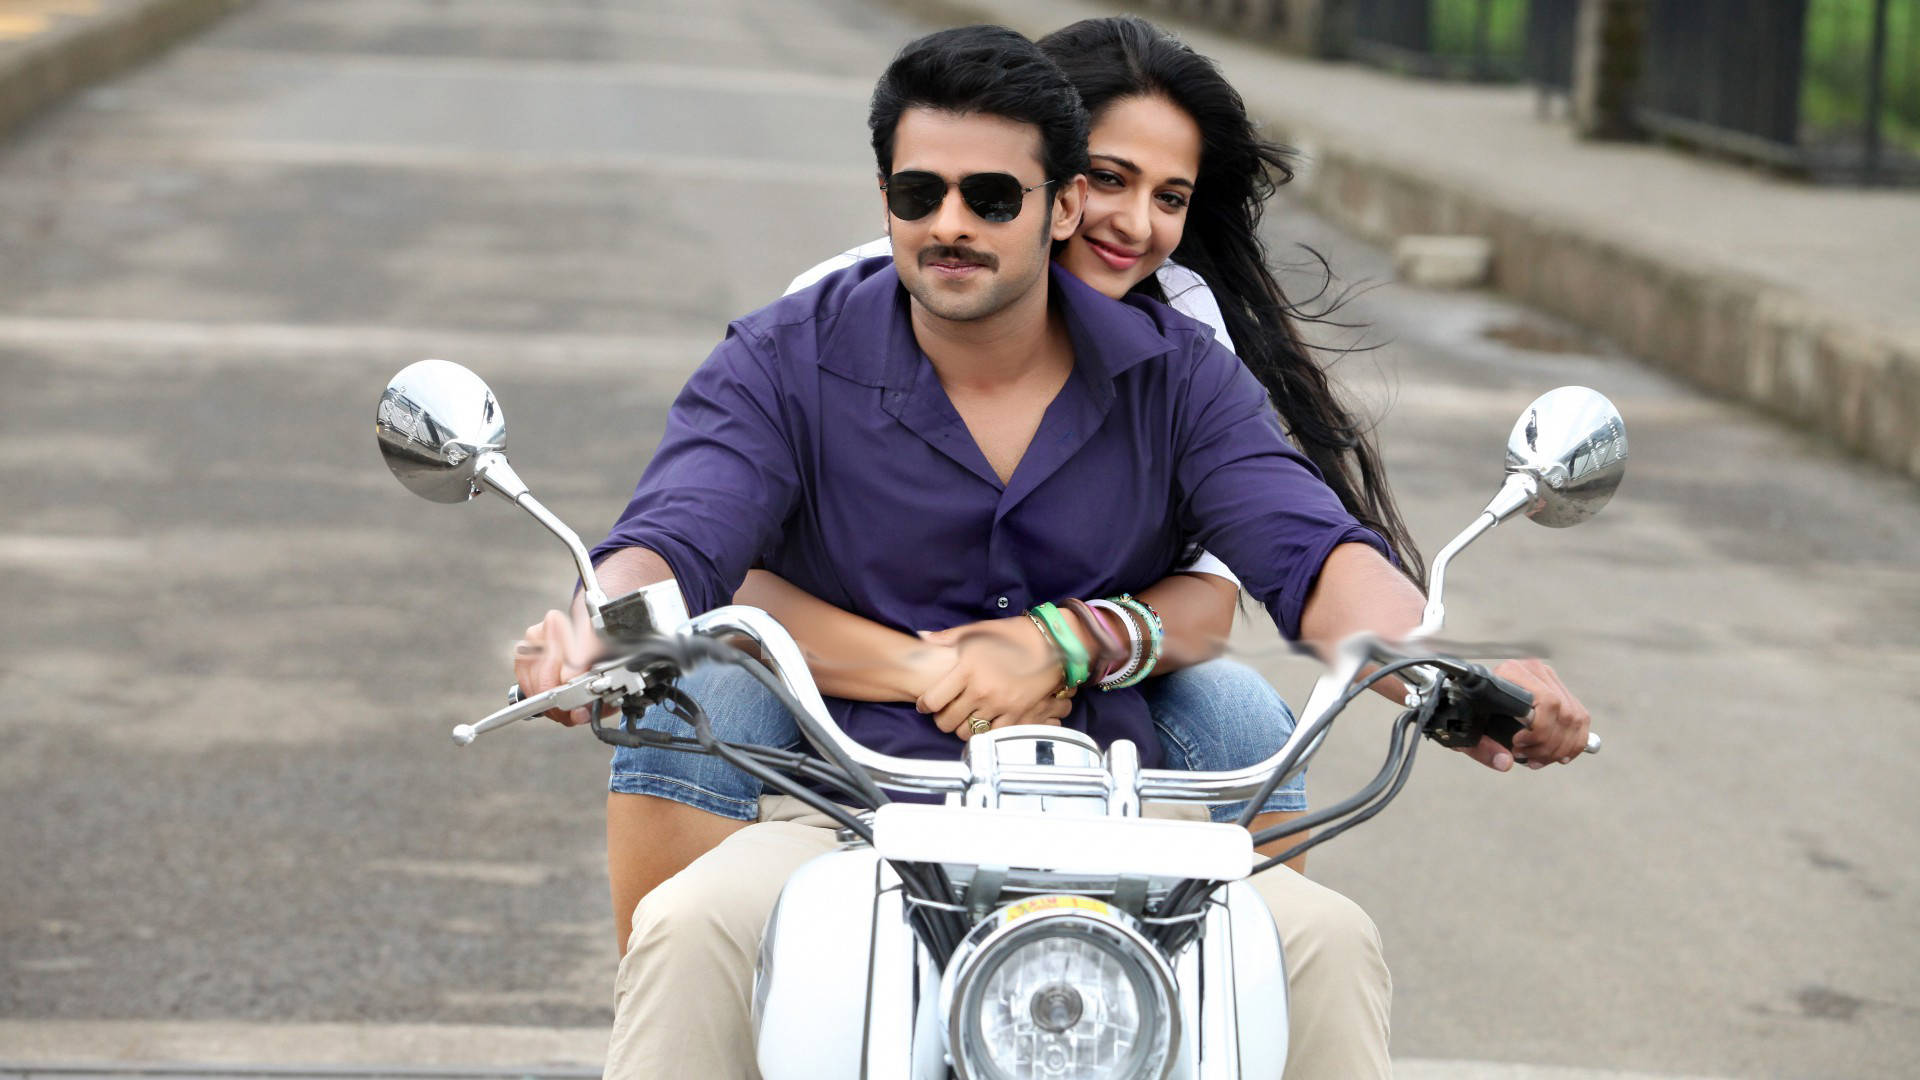 Download Prabhas Hd Driving With A Woman Wallpaper 